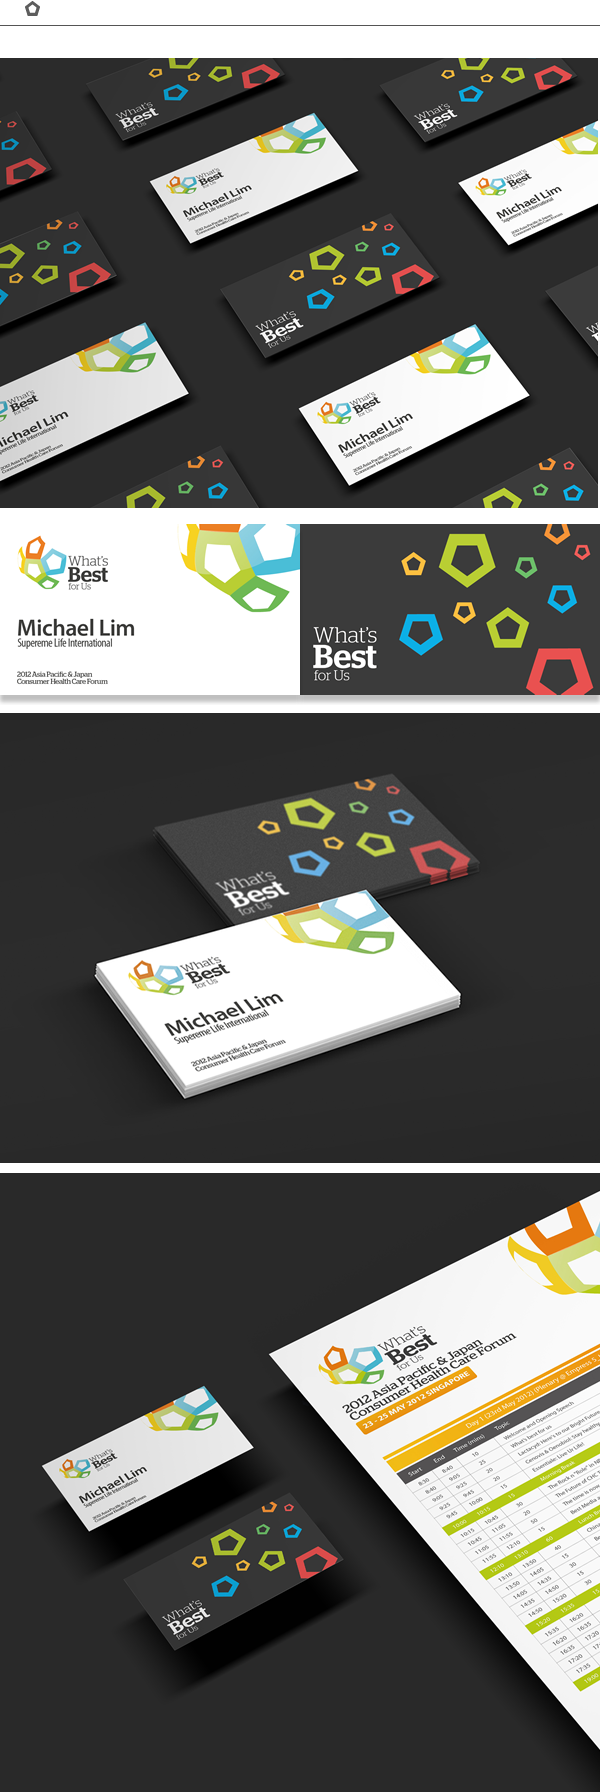 asia pacific japan Consumer healthcare Health forum Logotype colorful color rainbow business card brand elements Typeface